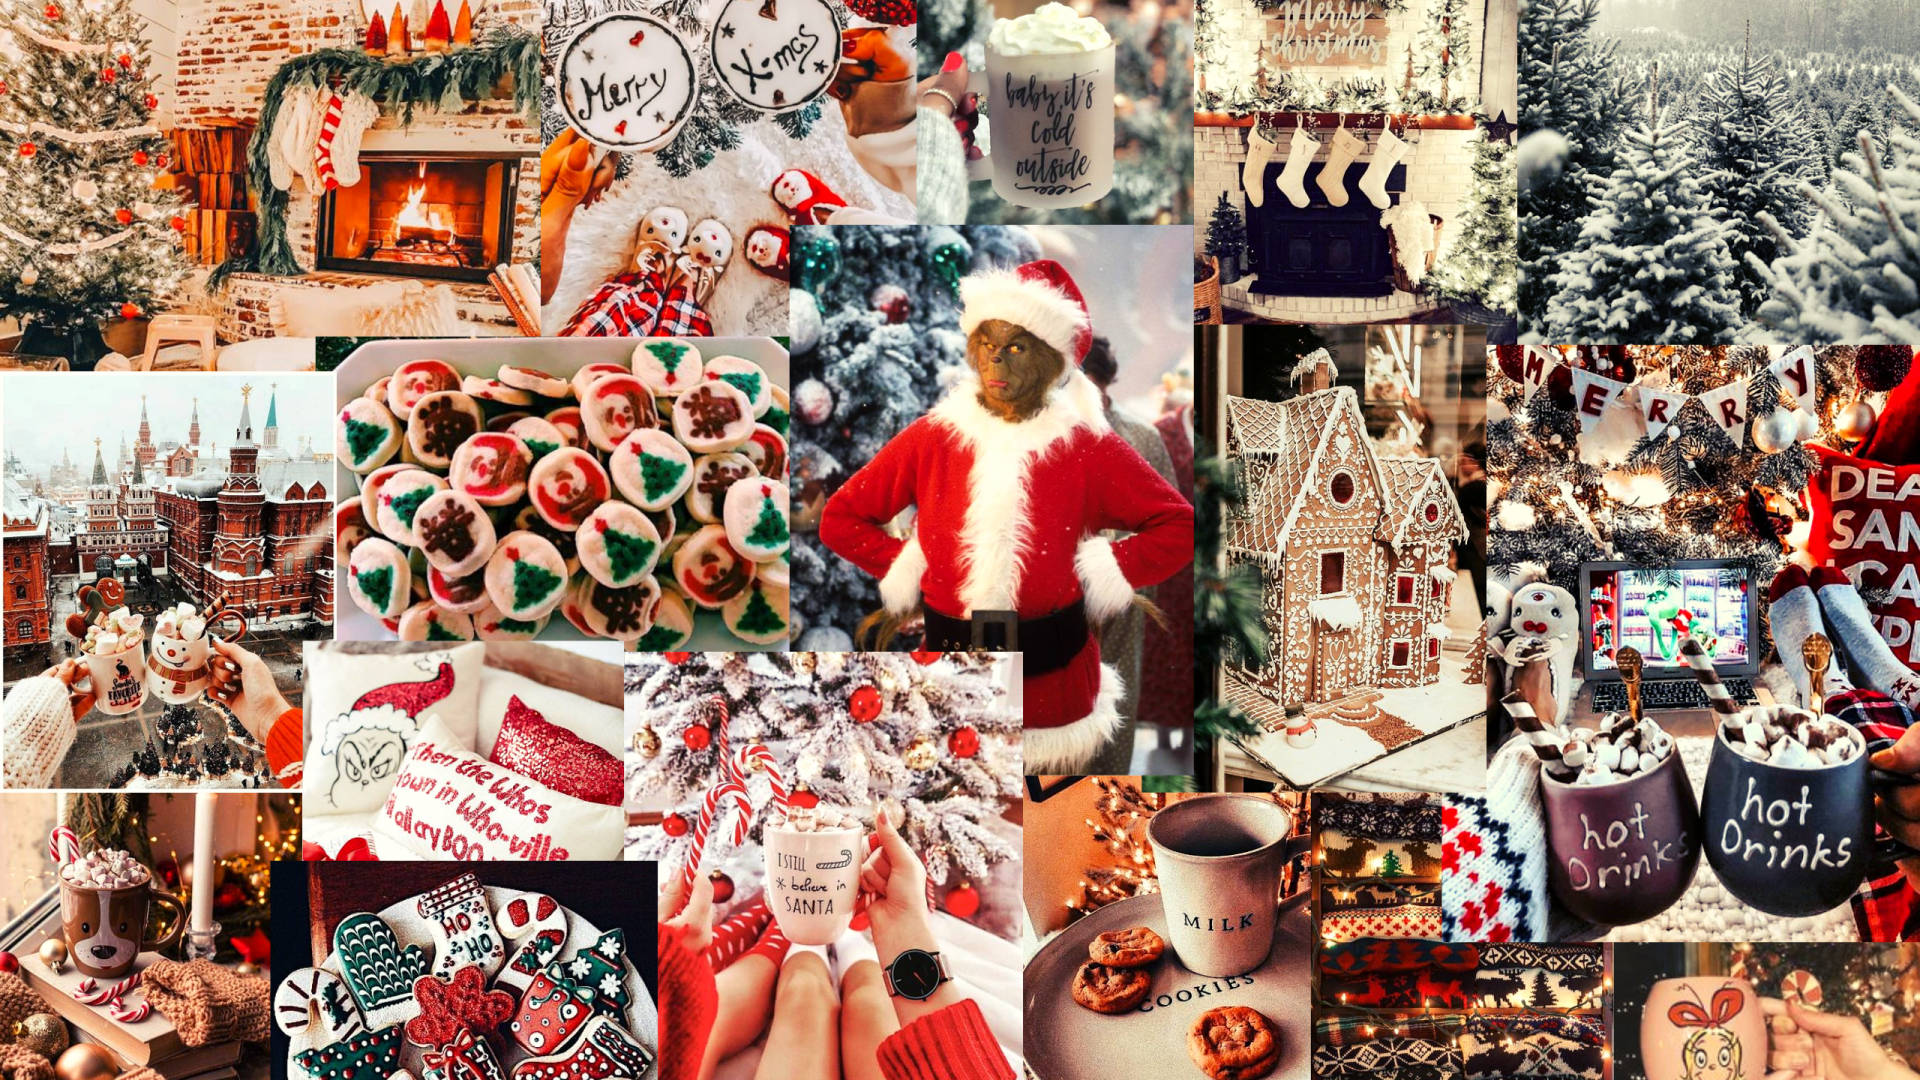 The Grinch's Christmas Collage